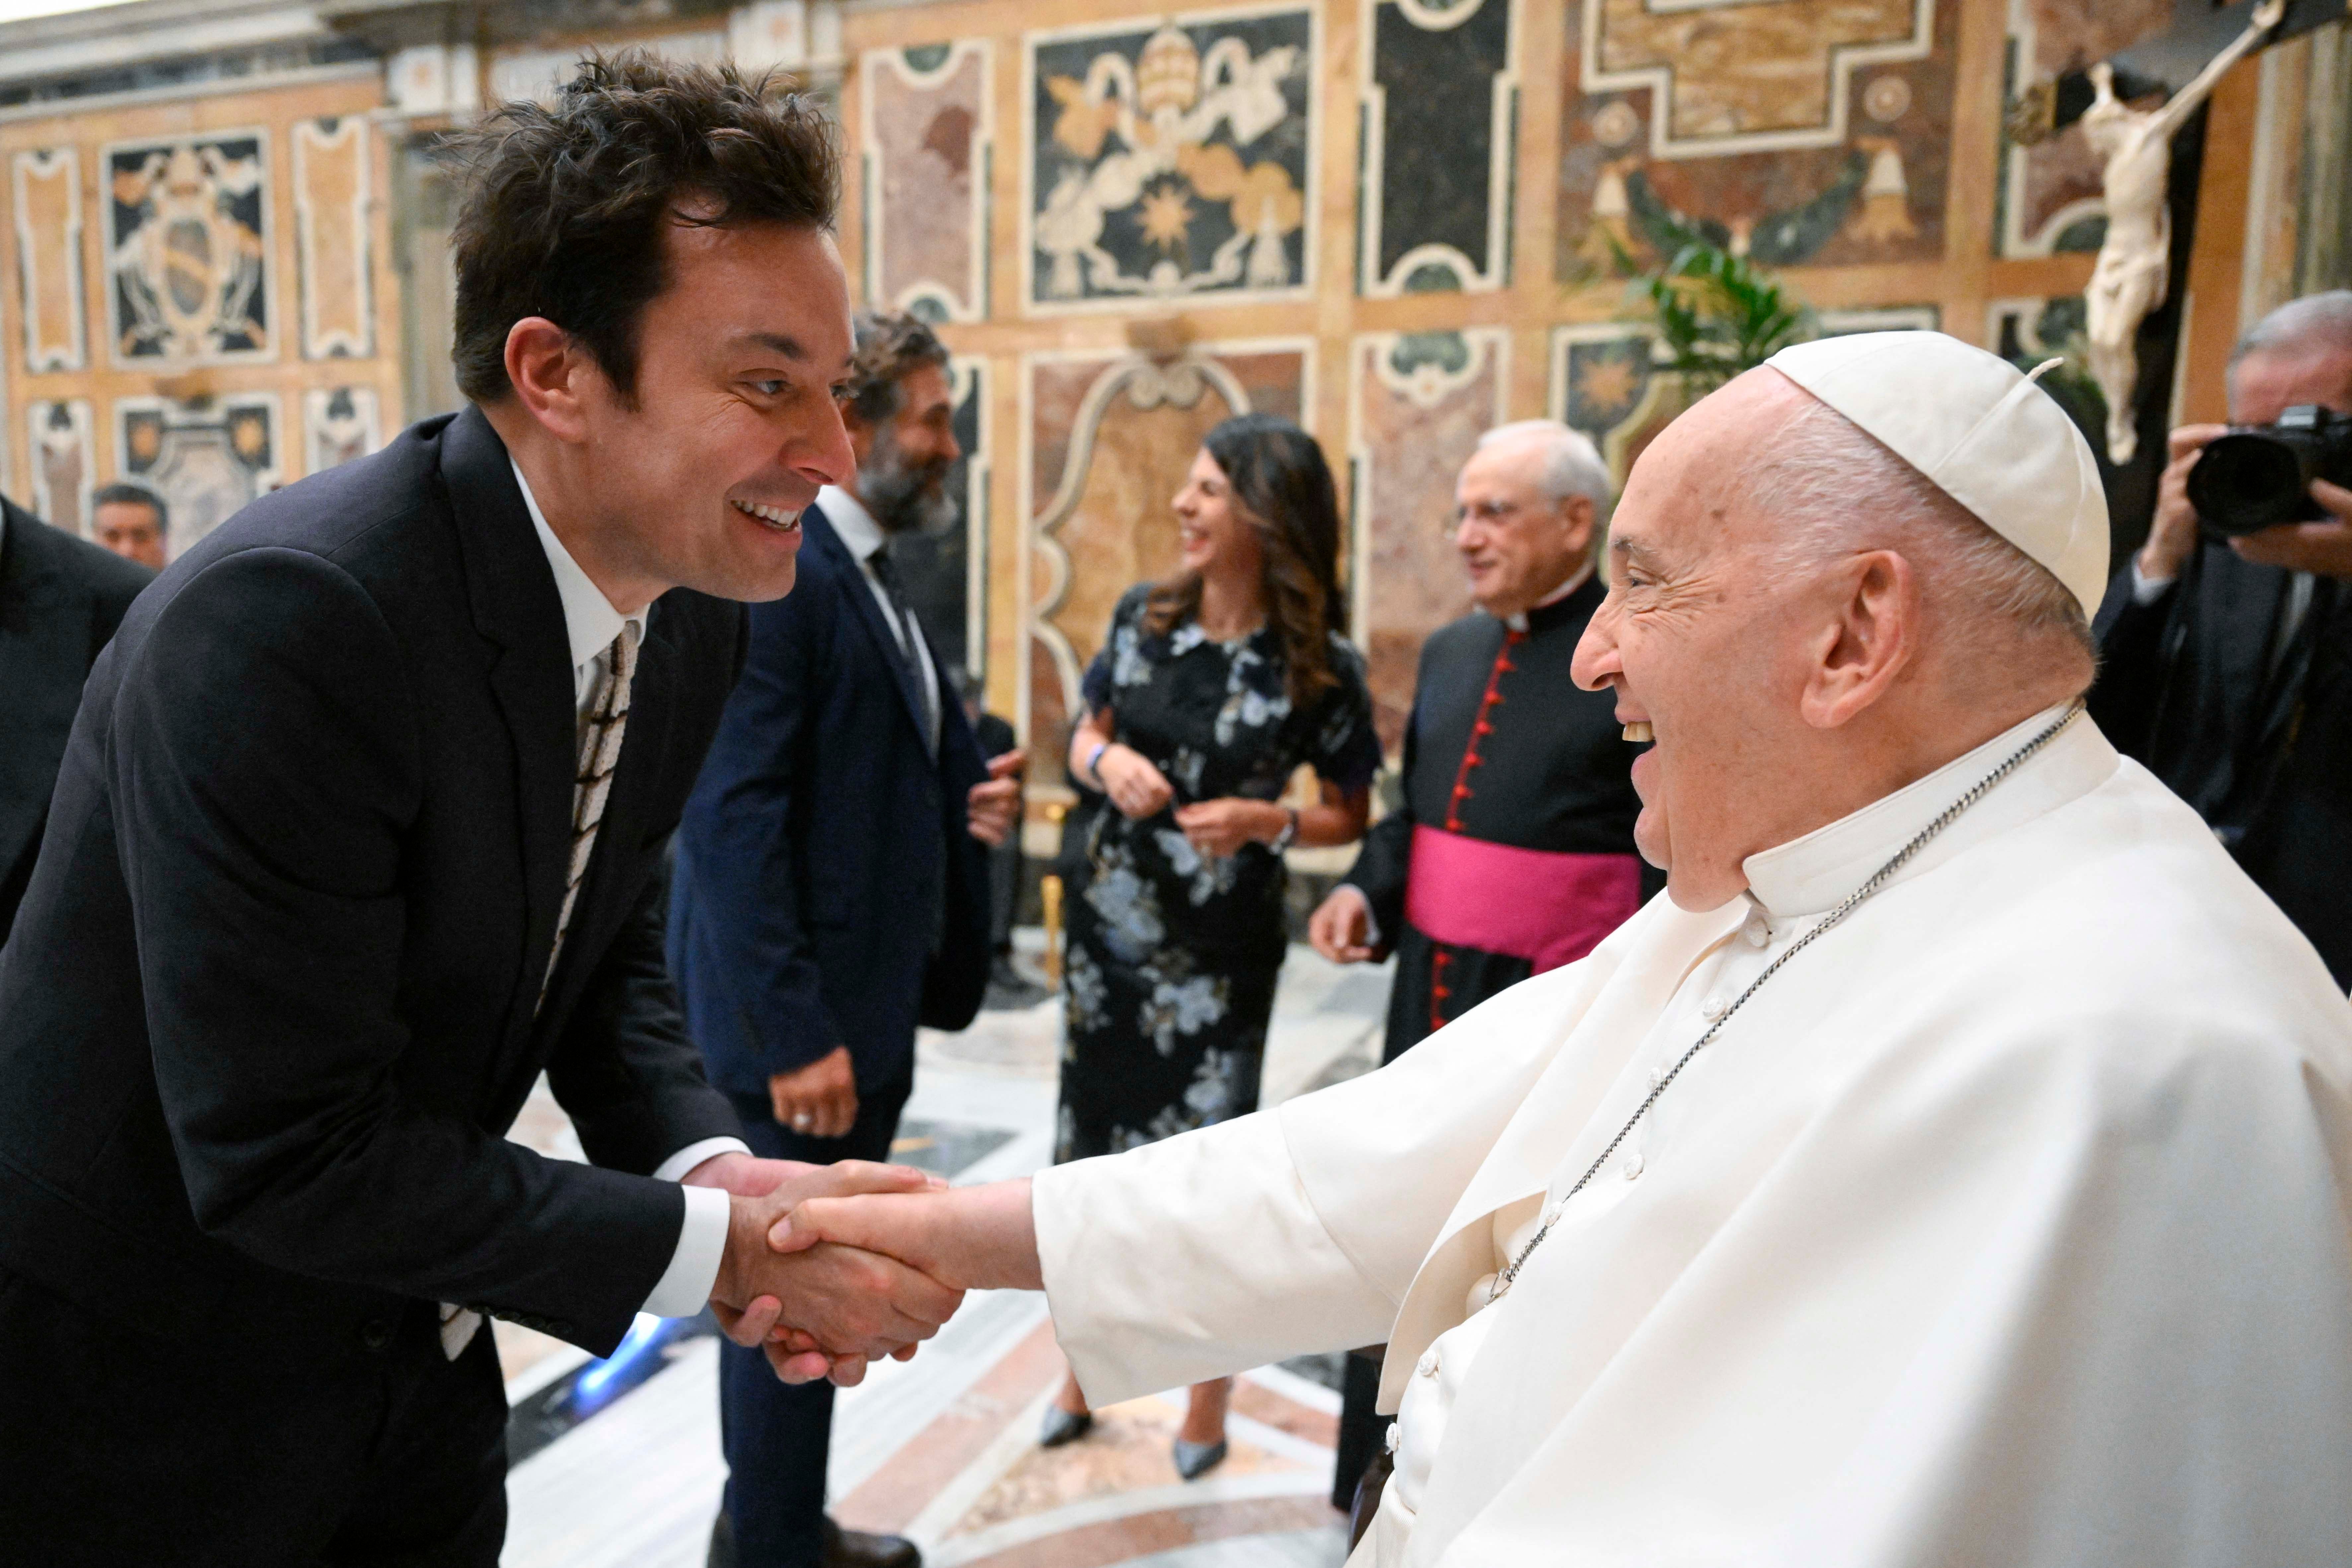 Pope Francis shakes hand with Jimmy Fallon